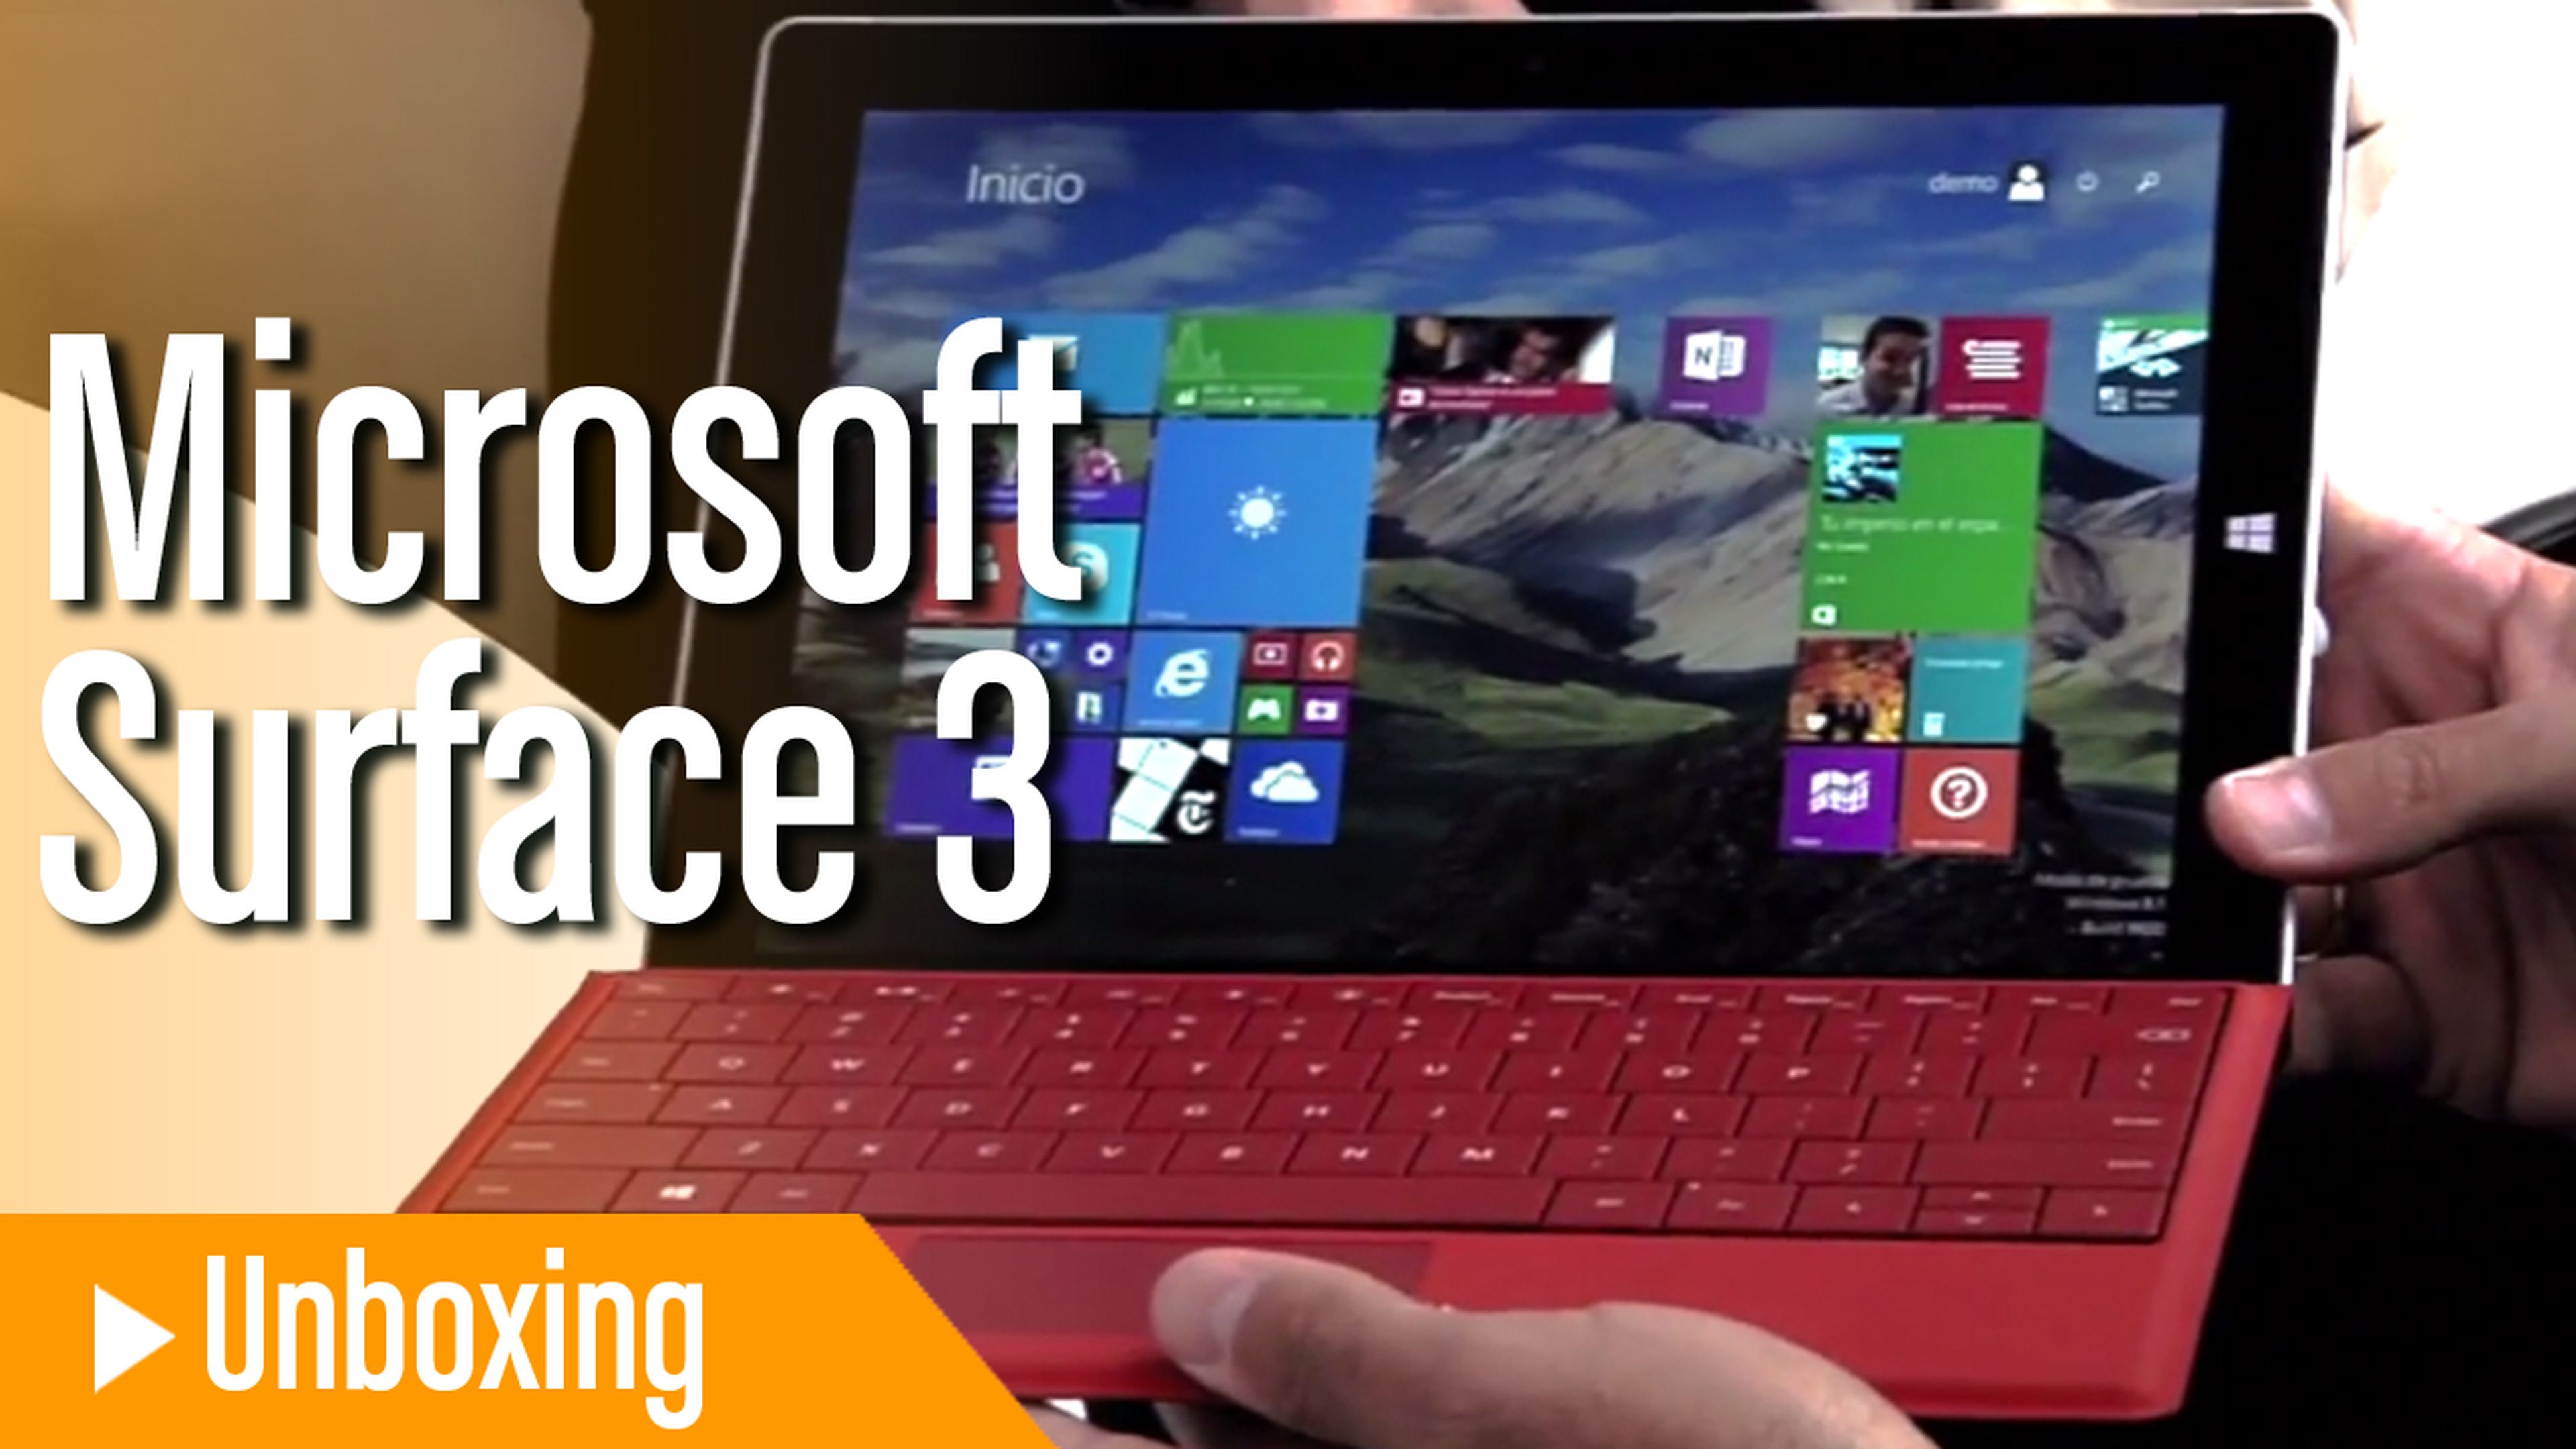 Unboxing Microsoft Surface 3